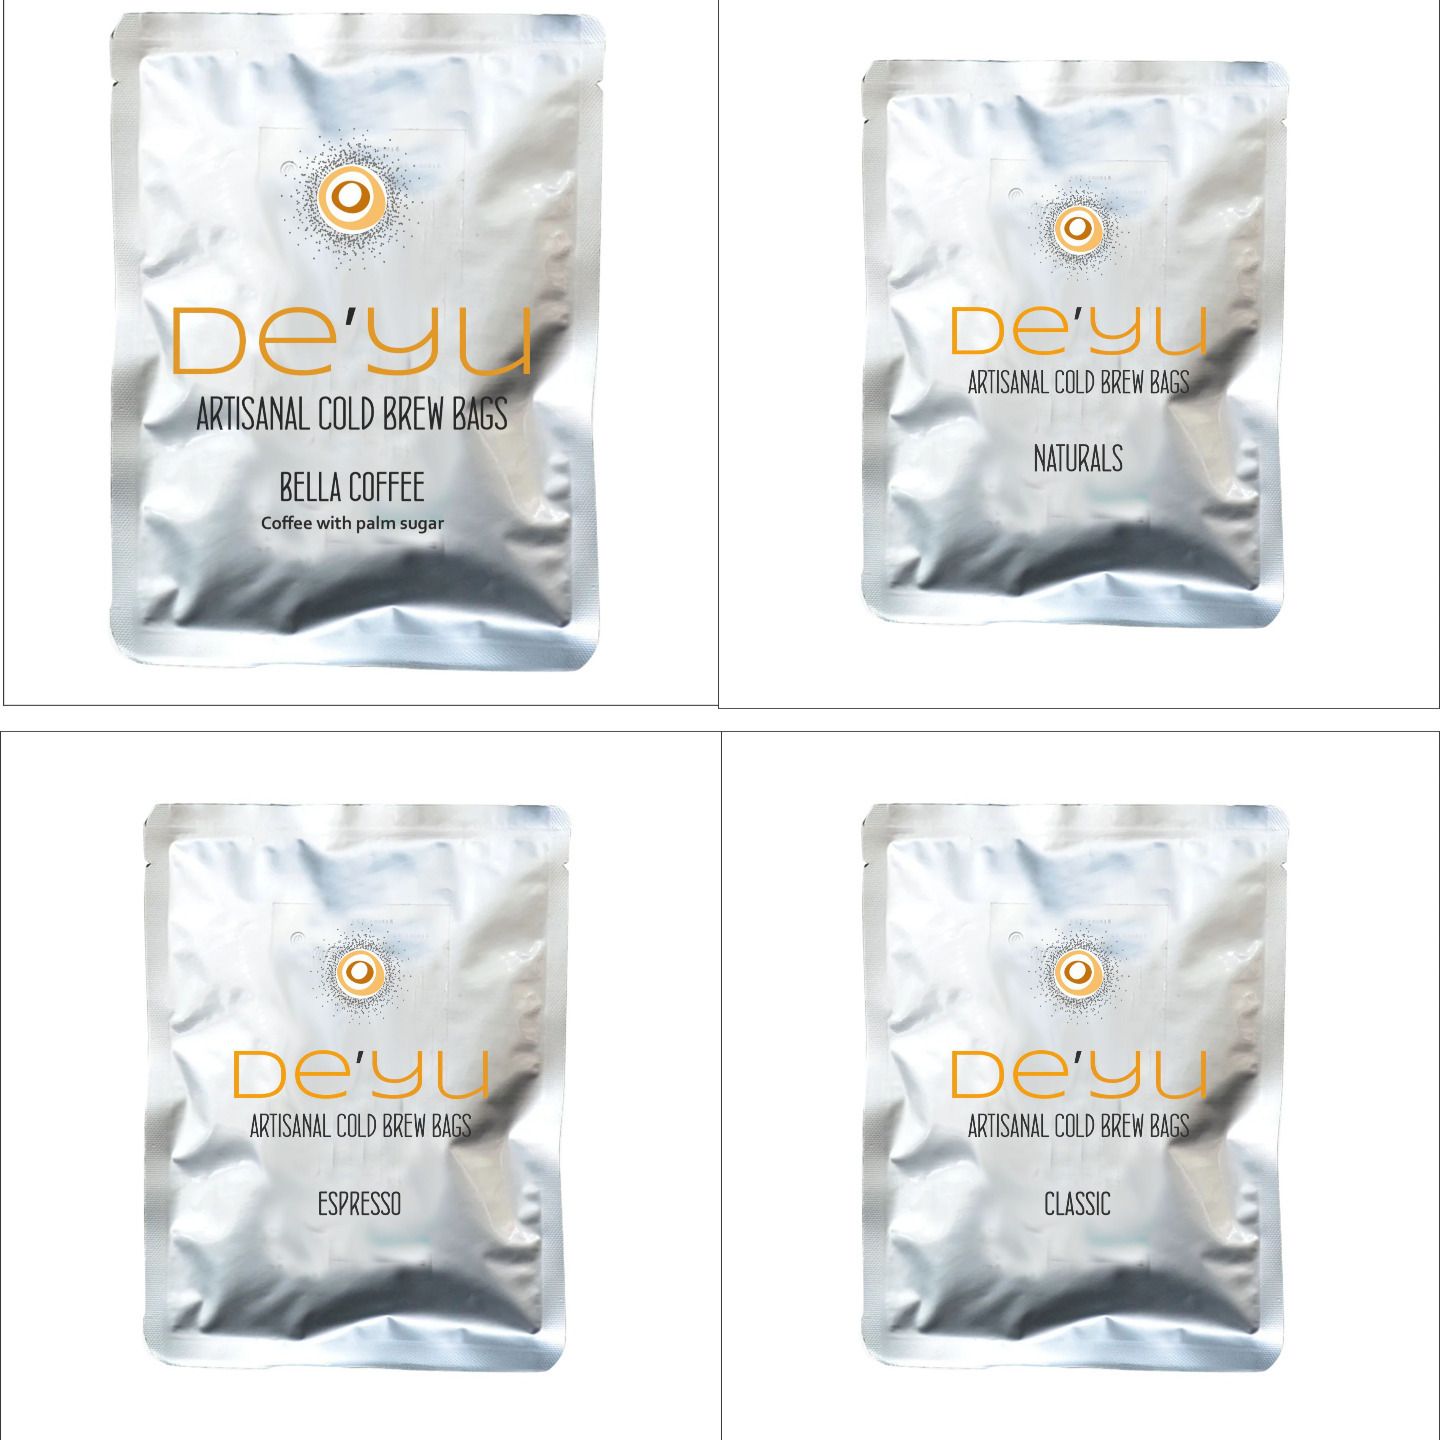 DEYU - Artisnal cold brew bags - Asorted flavours